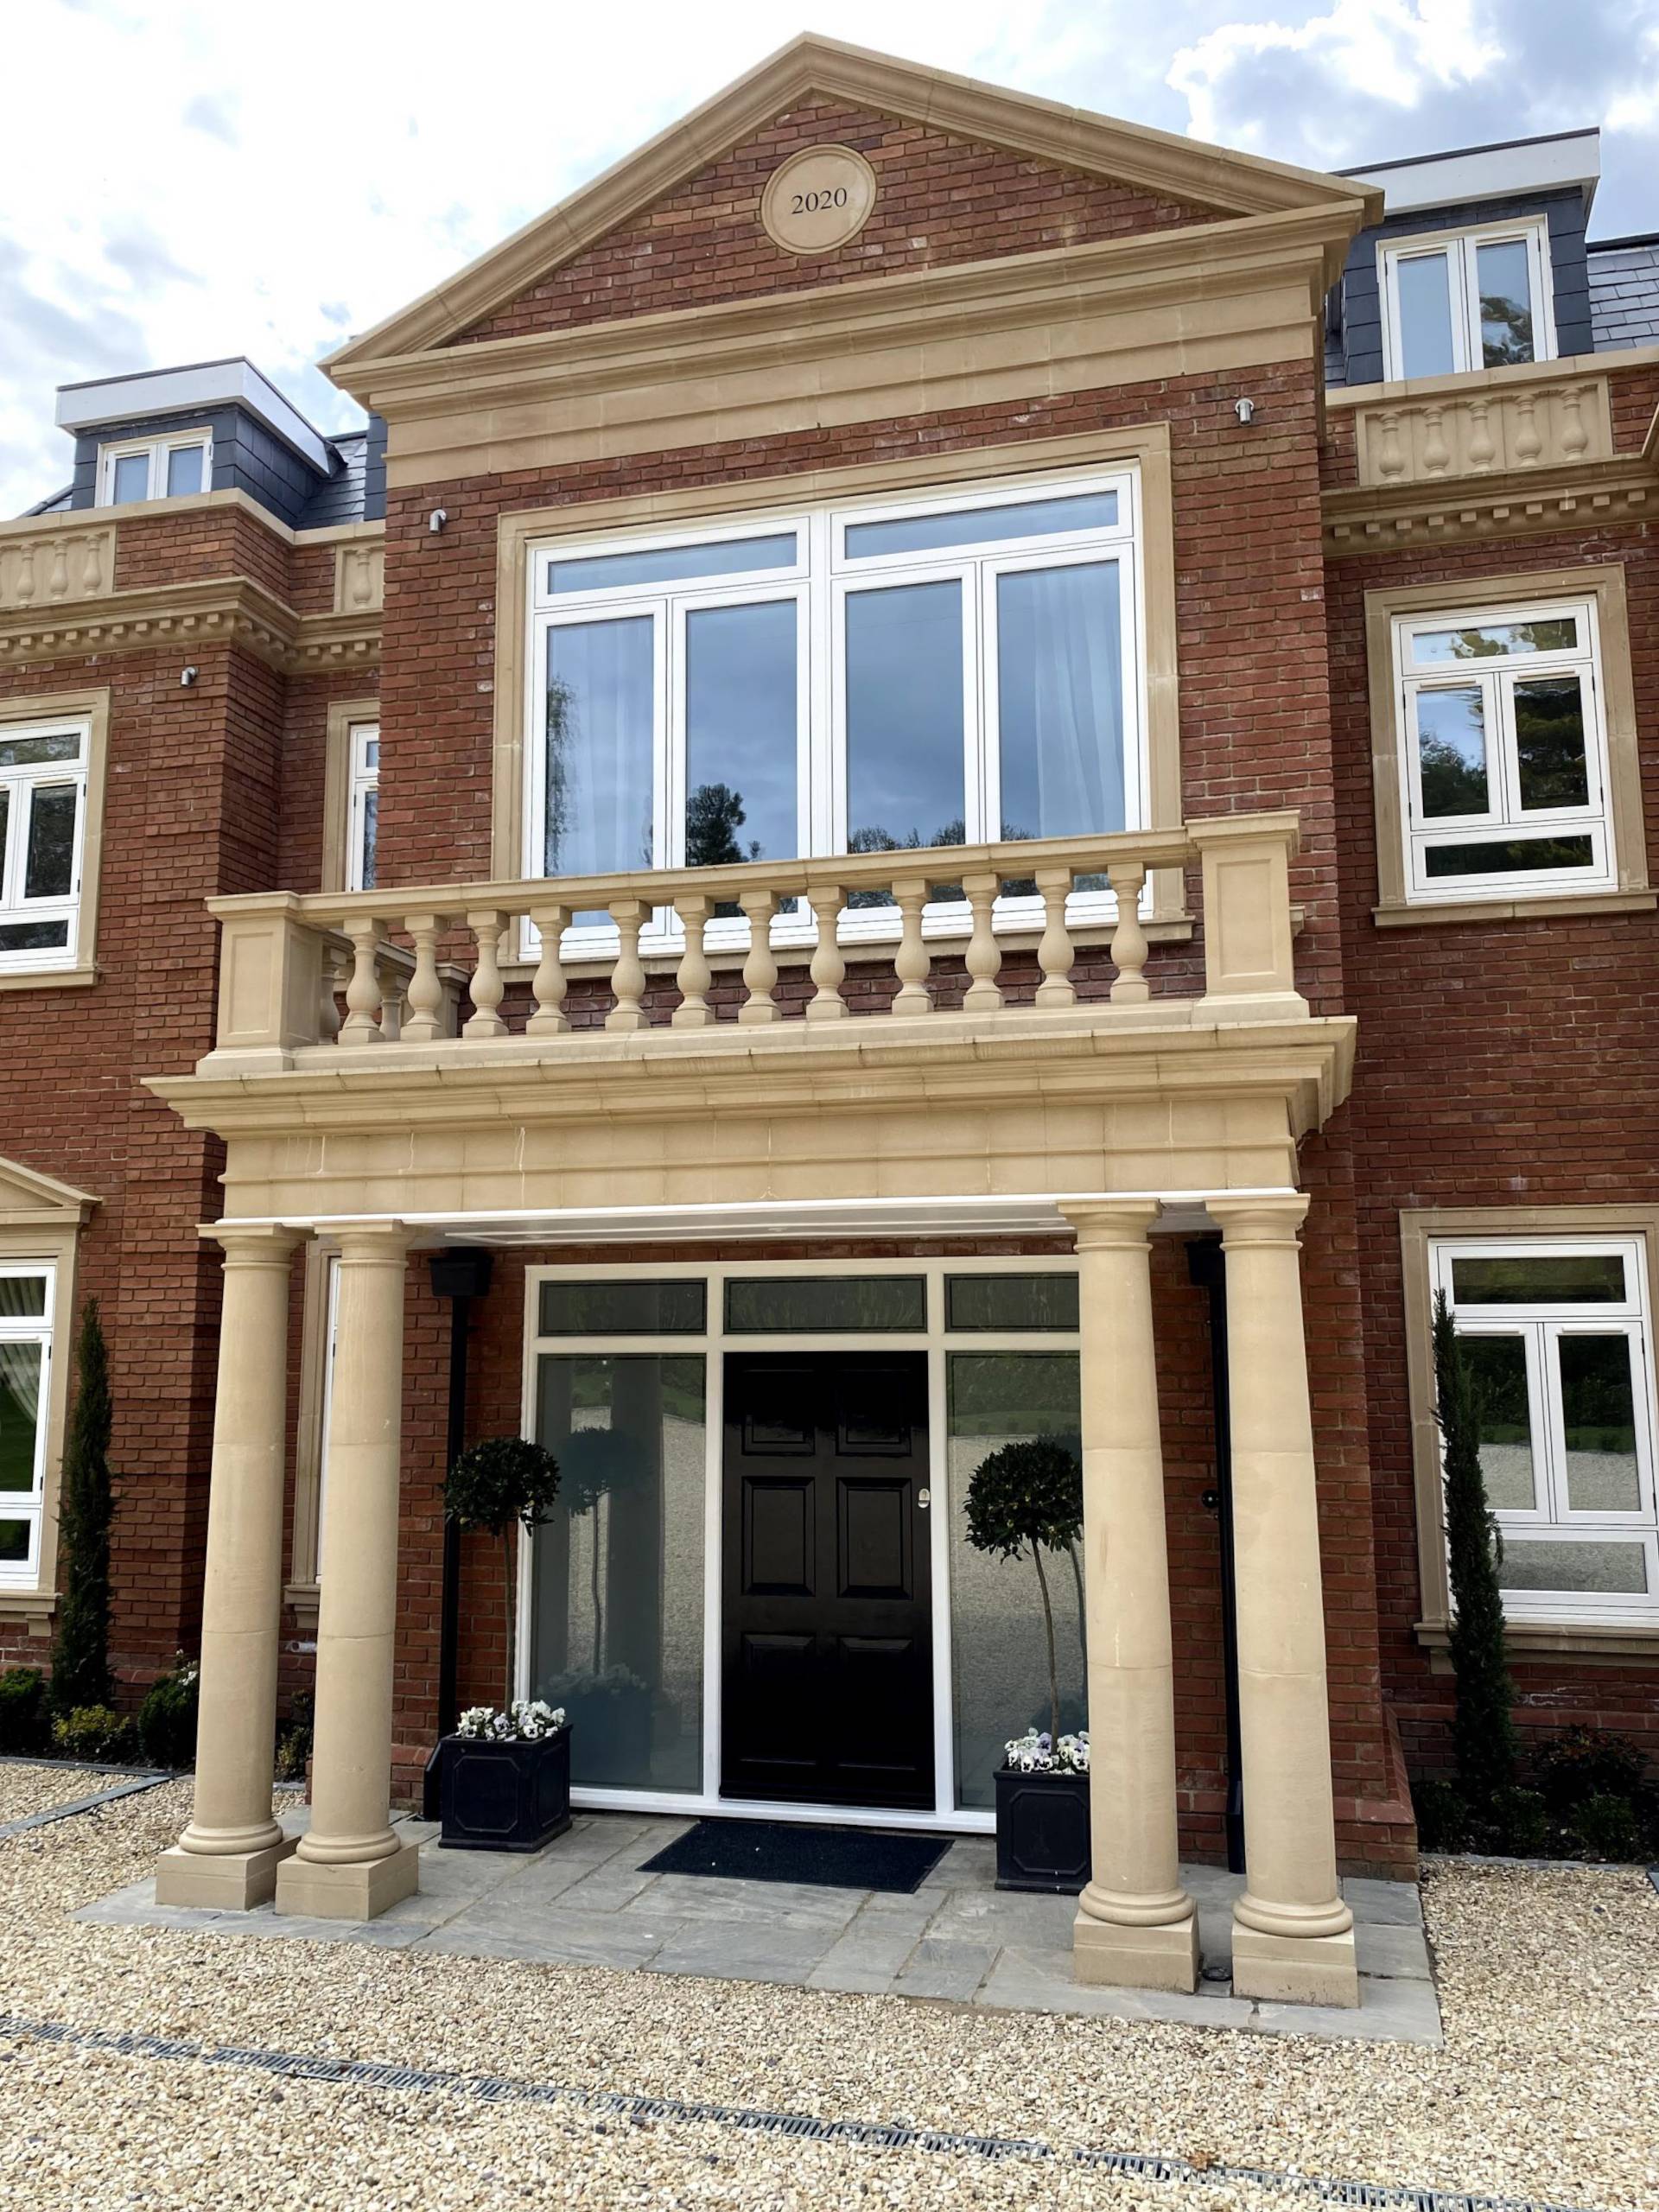 Make A Grand Entrance to Your Property with Amber Valley Stone’s Porticos